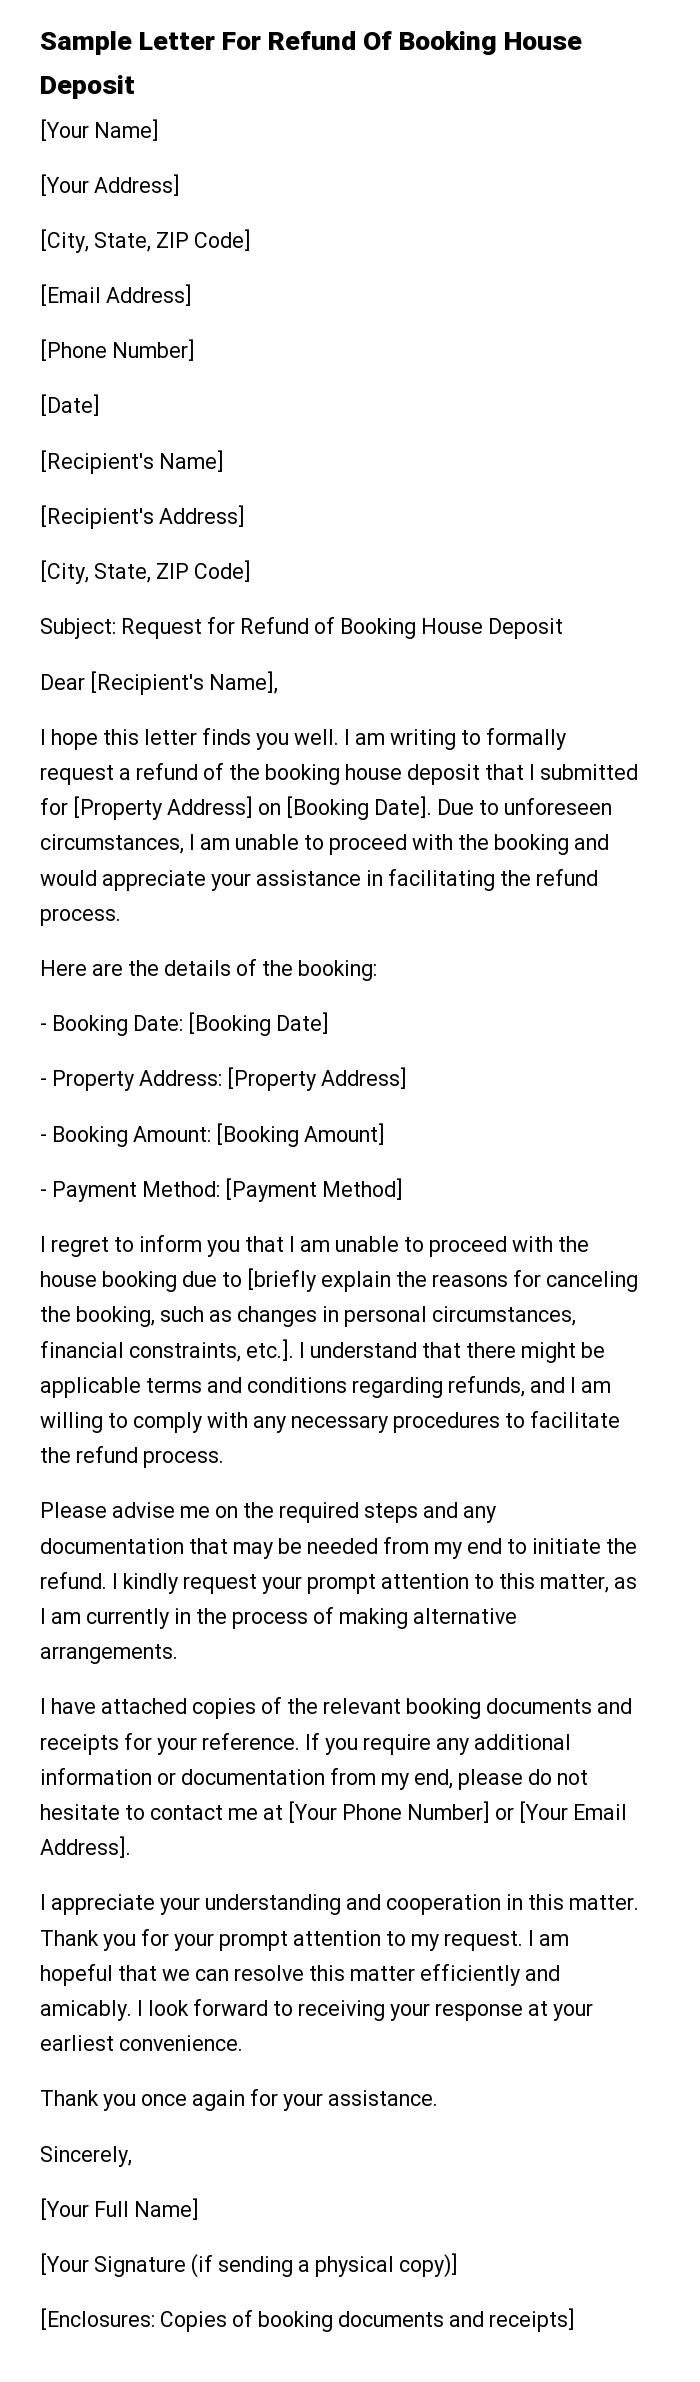 Sample Letter For Refund Of Booking House Deposit